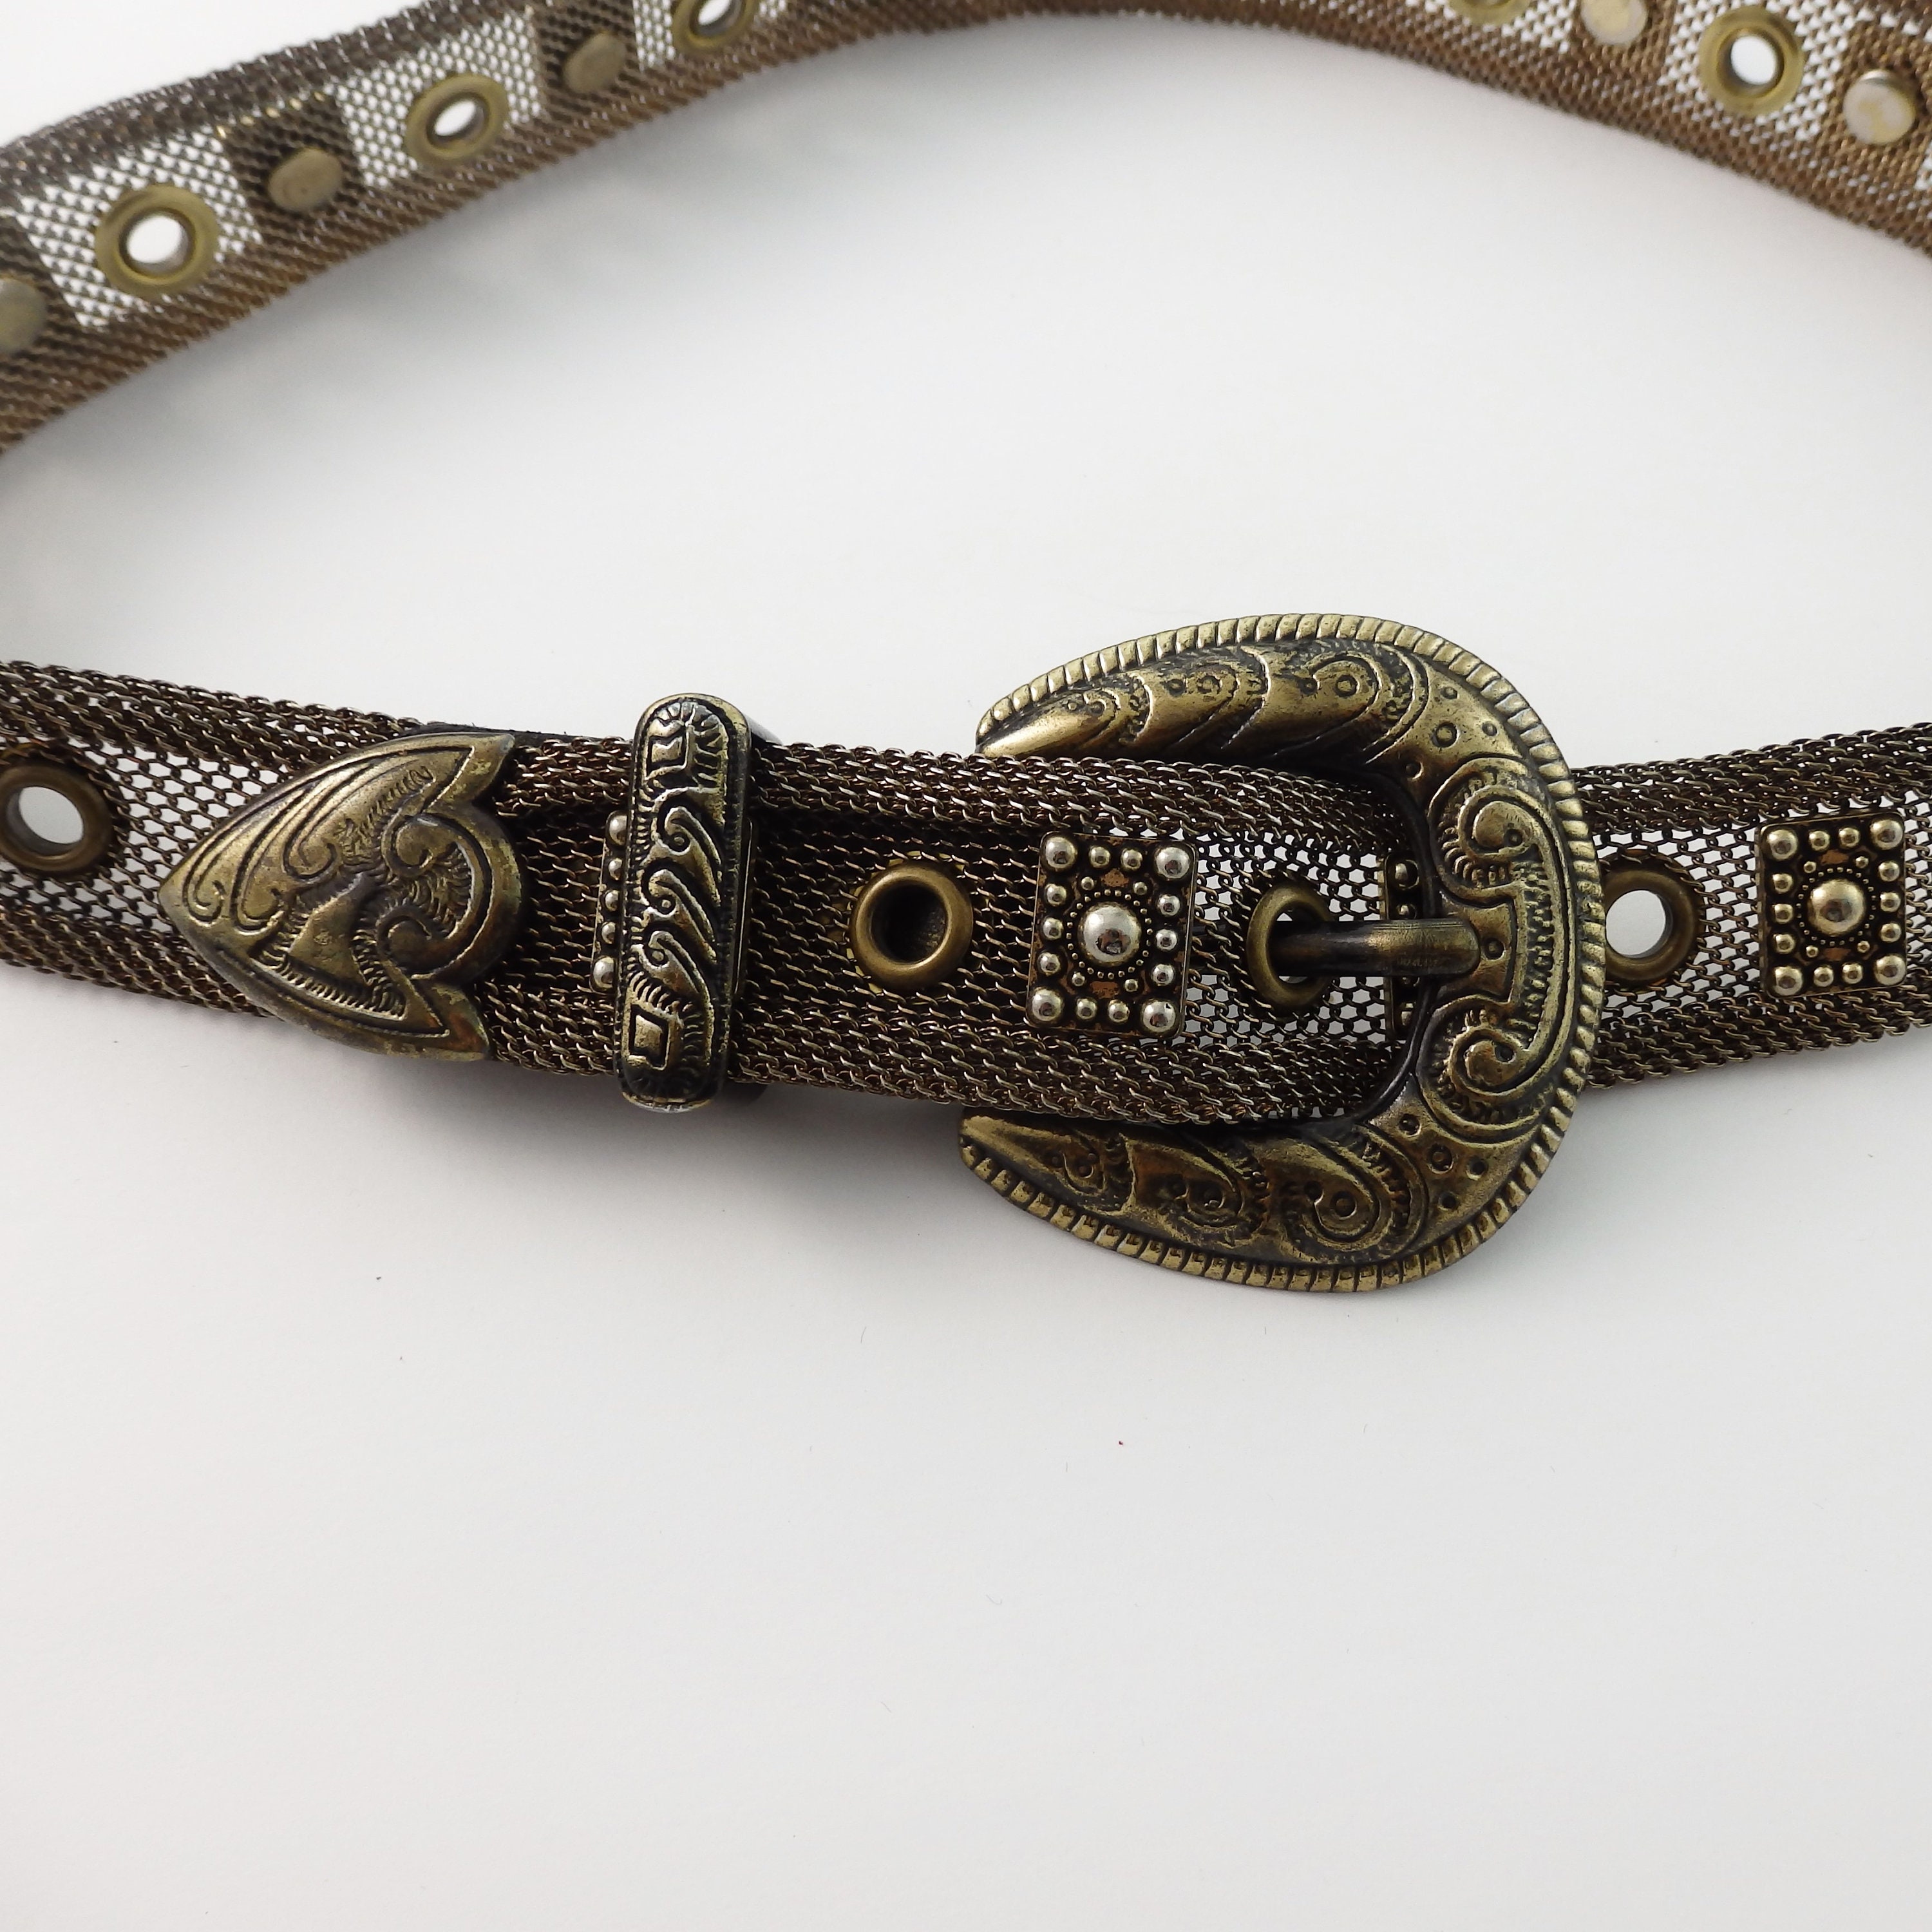 Gold Metal Mesh Ladies Belt with Western Concho Style Buckle Set